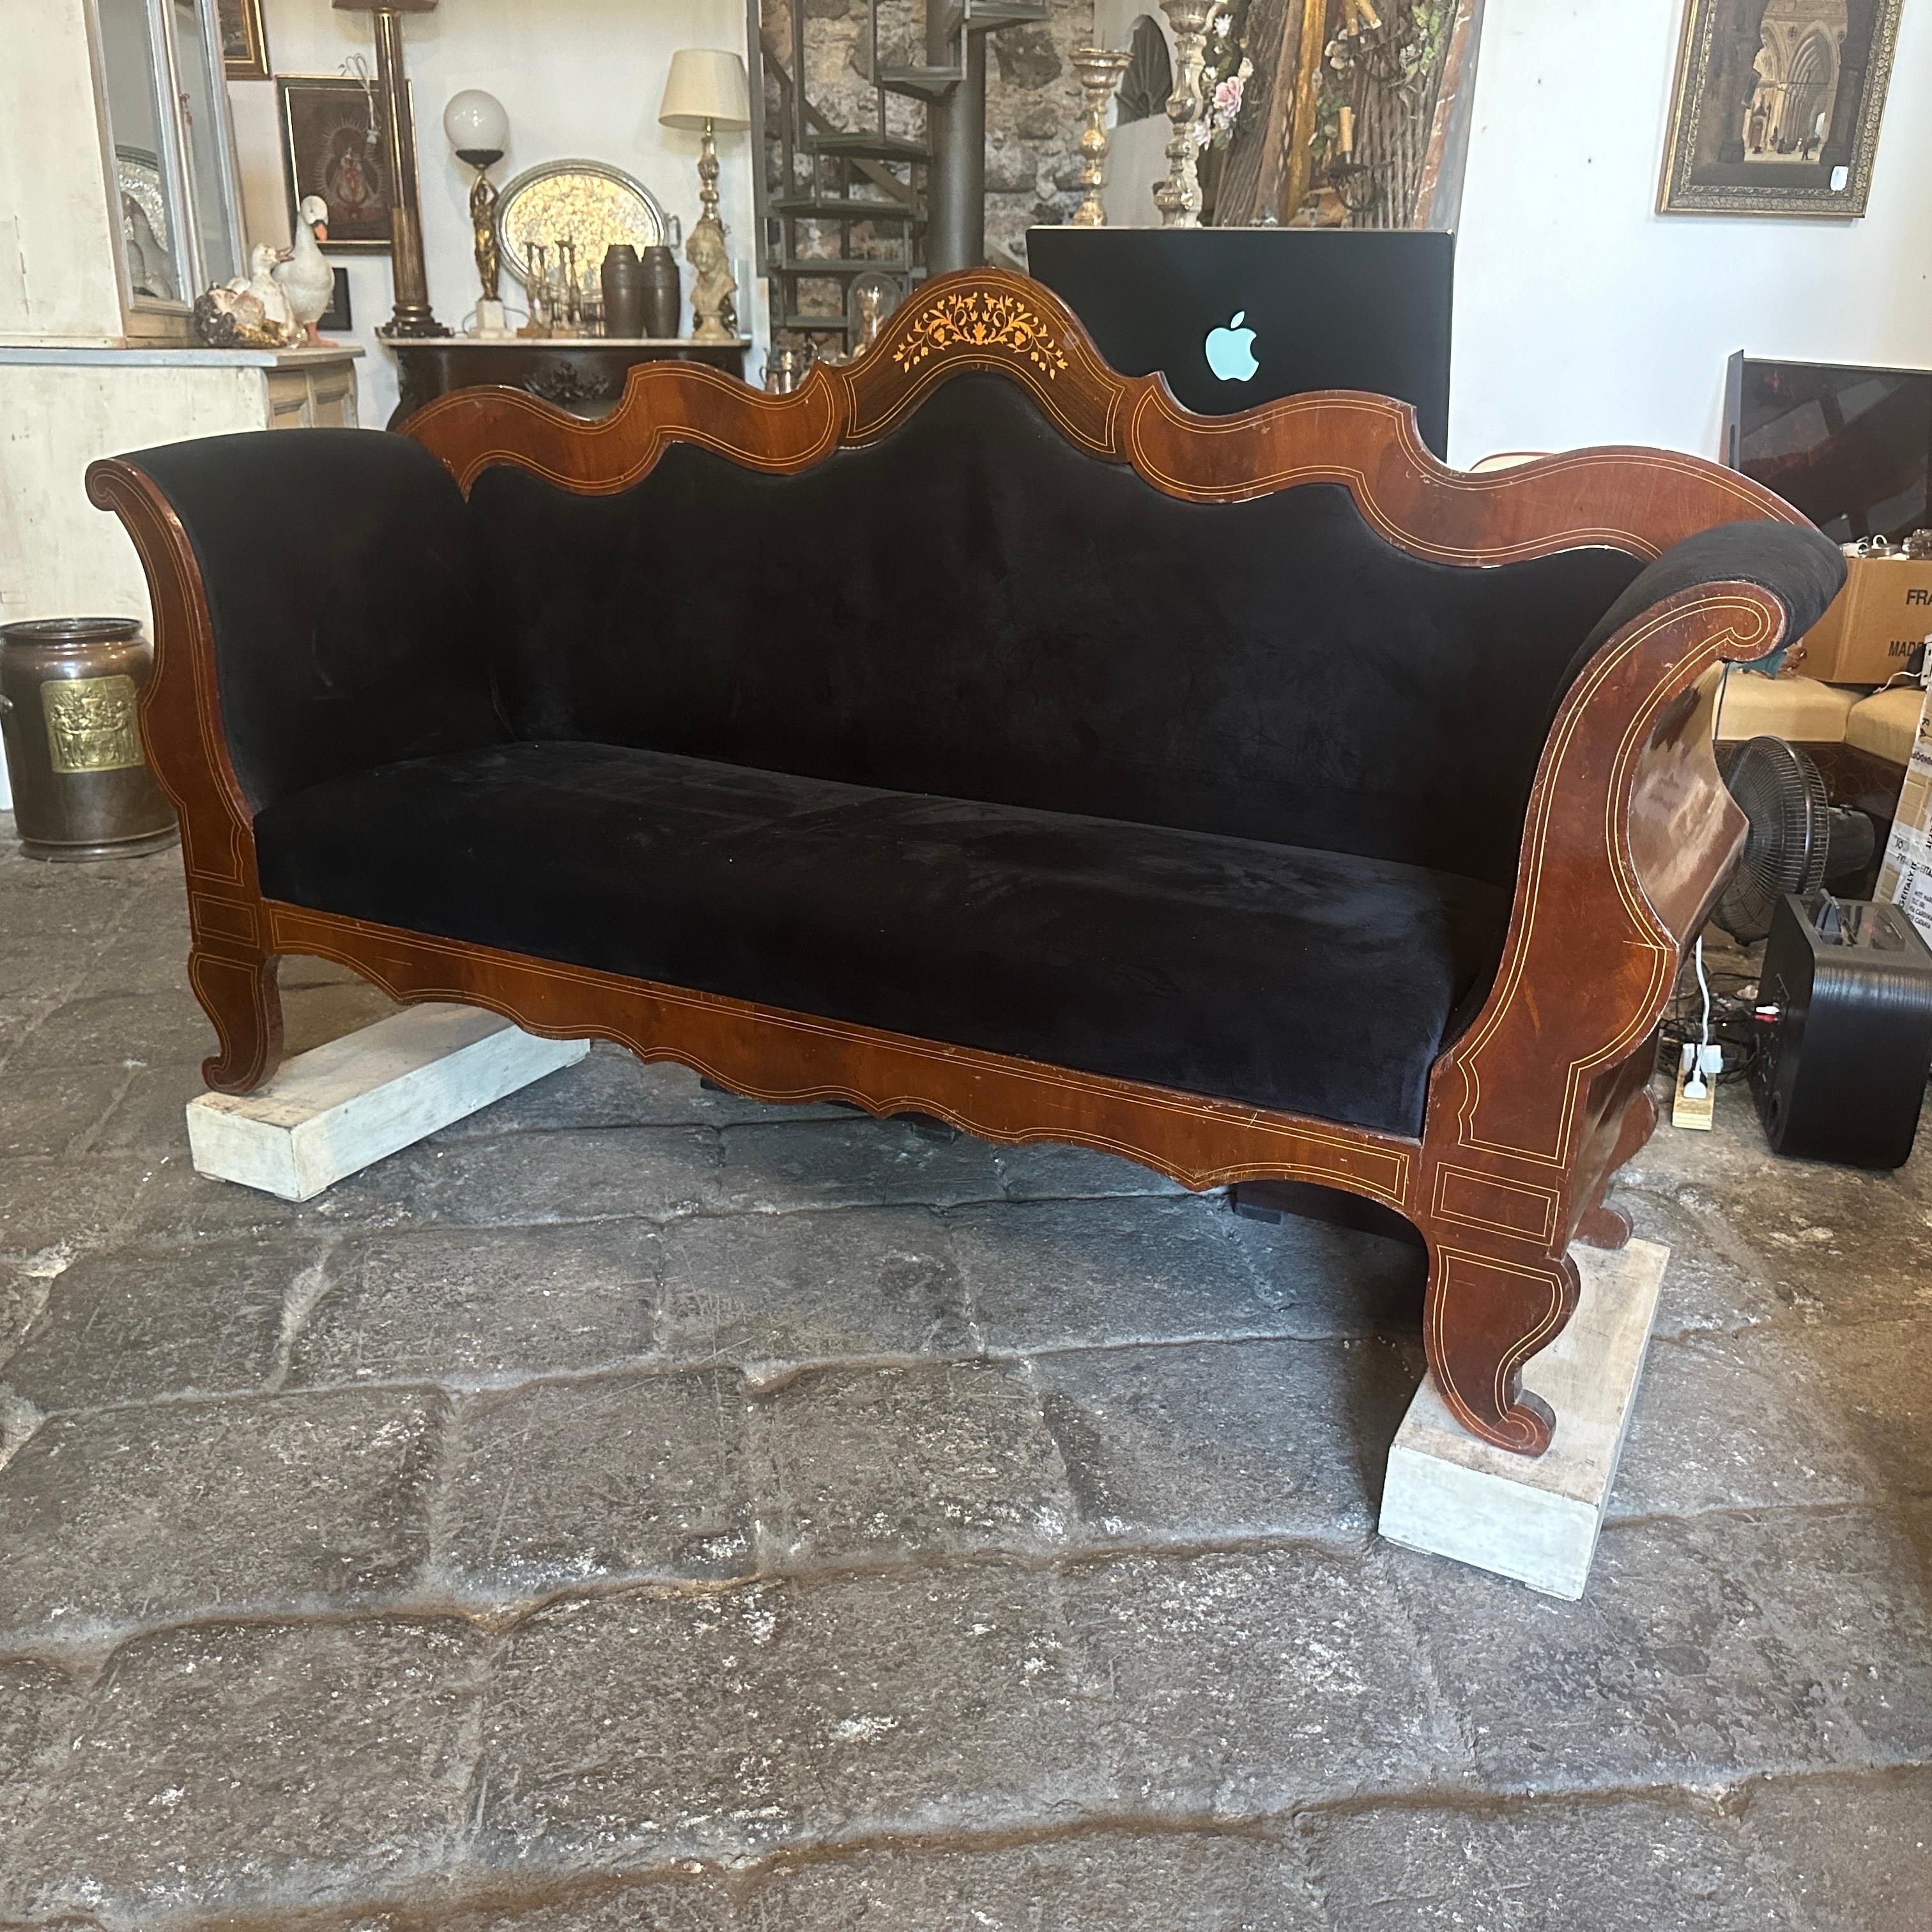 This Sicilian sofa is a piece of furniture that embodies the elegance and craftsmanship of the Charles X period, which was prominent in France during the early 19th century. The sofa's frame is crafted from selected mahogany wood mahogany and maple